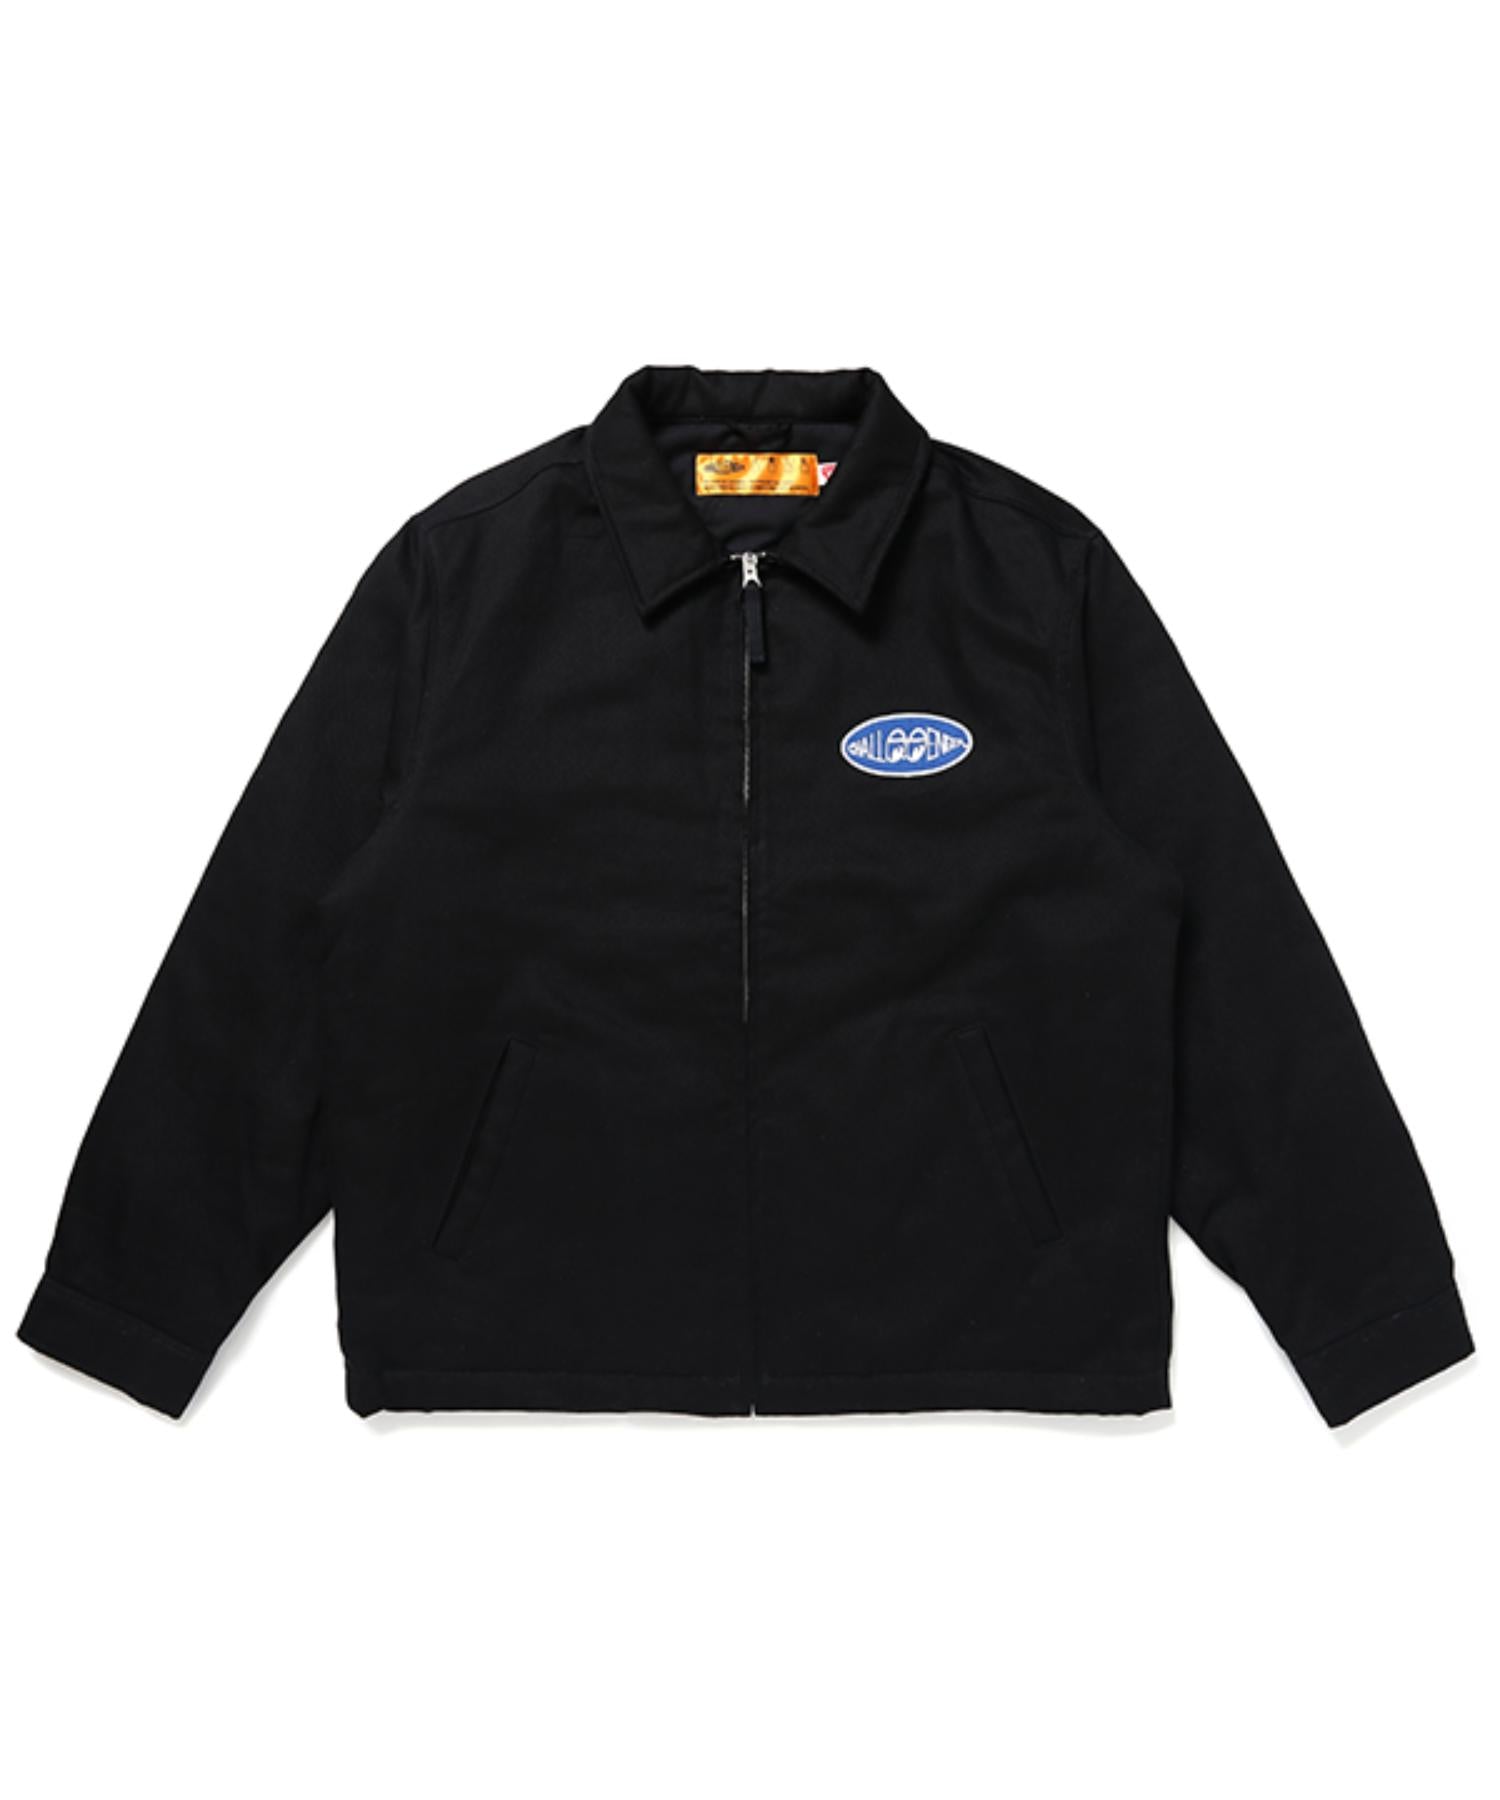 CLG-MOON023-009☆CHALLENGER x MOON Equipped WORK JACKET